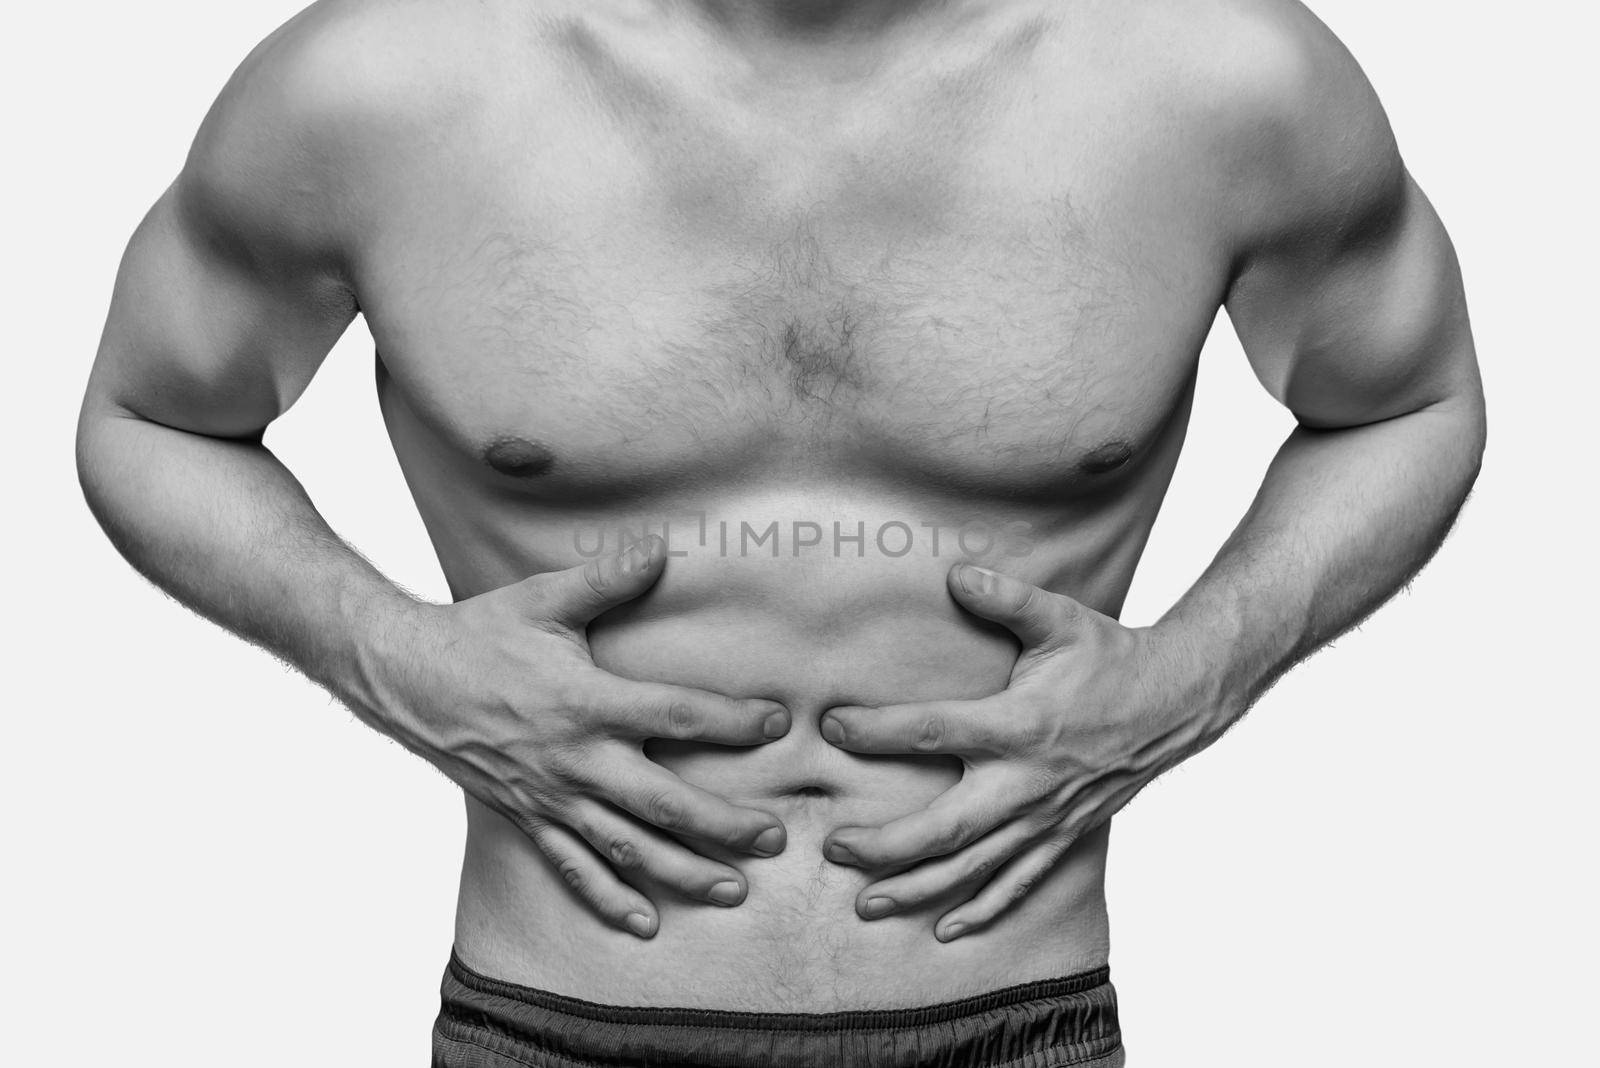 Unrecognizable man compresses the abdomen due to pain. Monochrome image, isolated on a white background